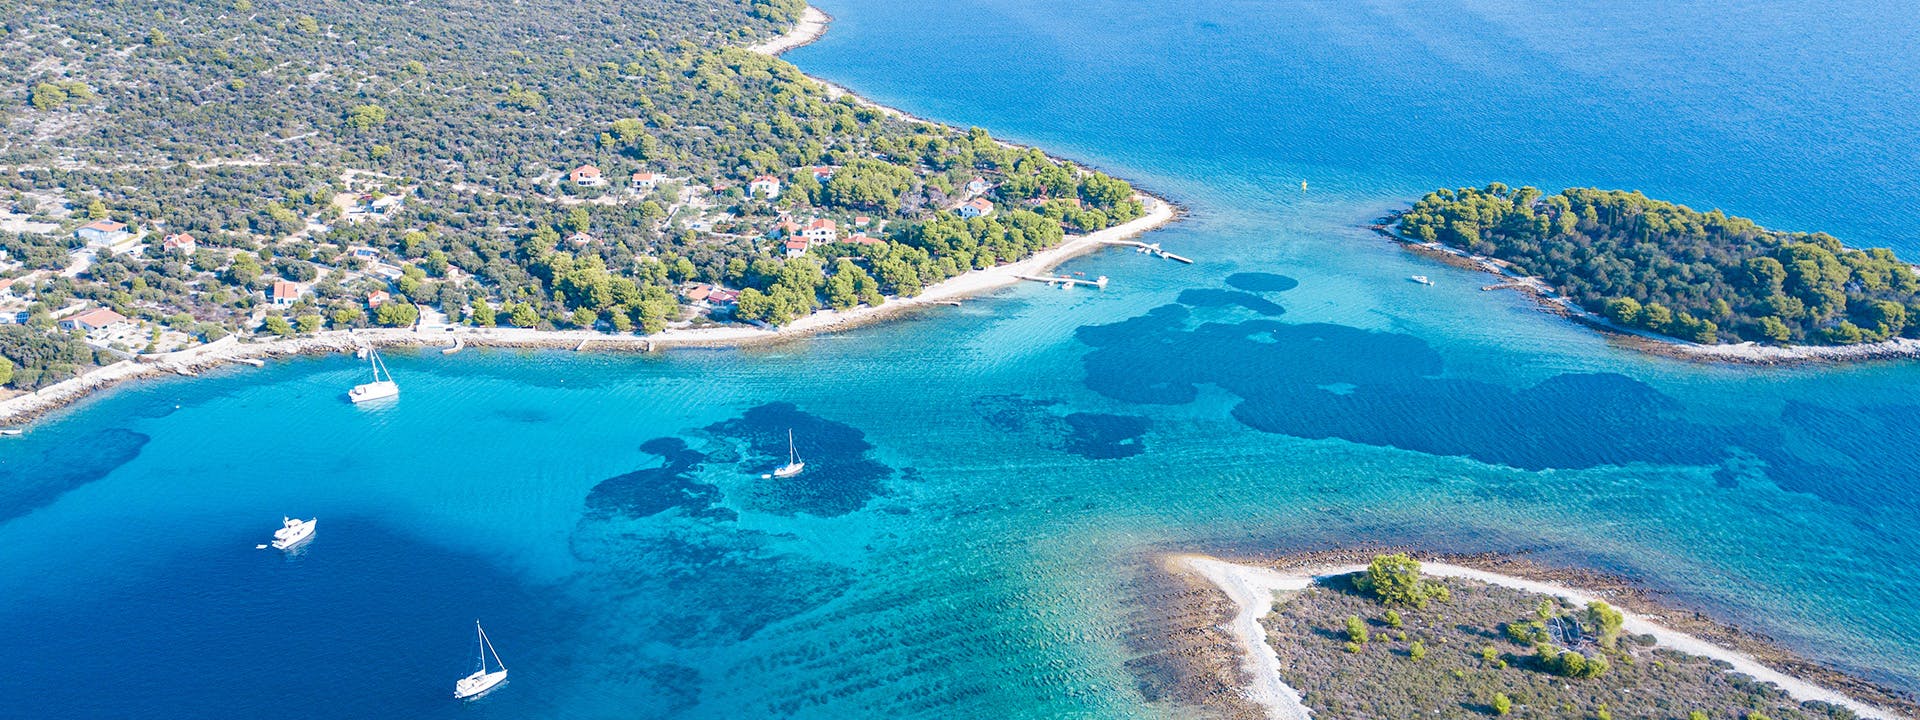 Private tour to Blue Lagoon and 3 Islands from Trogir